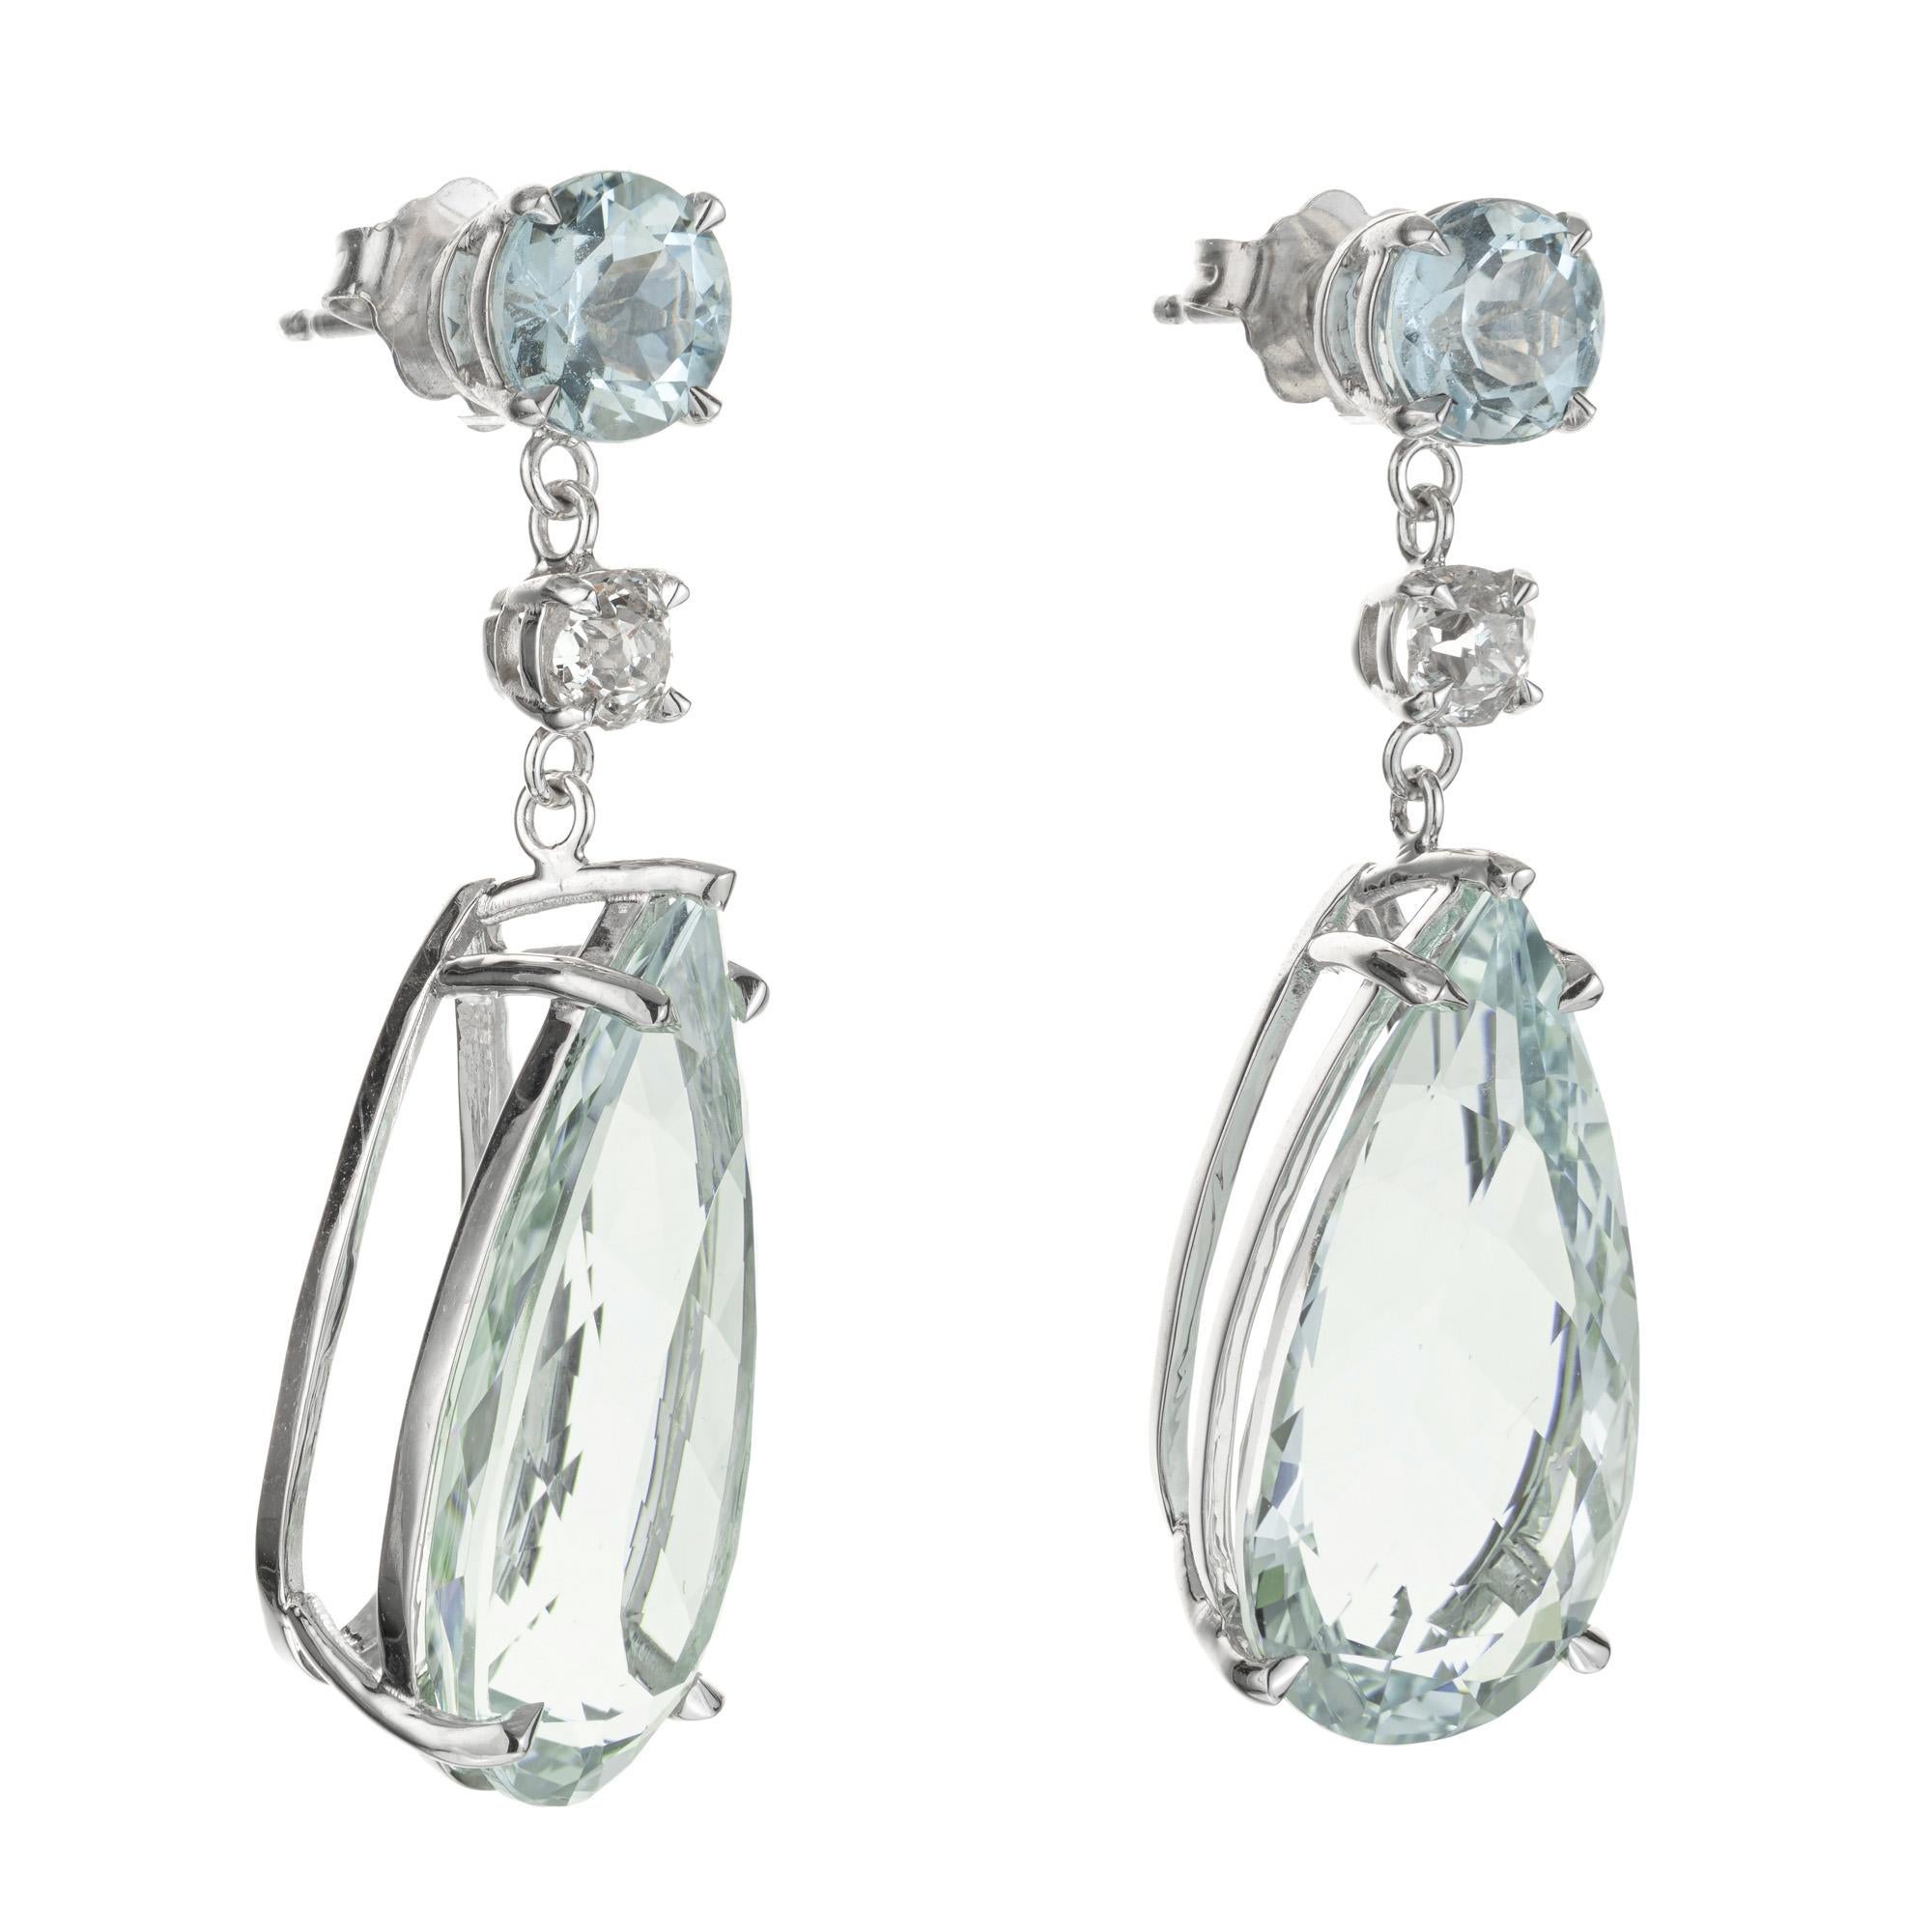 Soft bright greenish blue natural untreated aqua and diamond dangle earrings. Two pear shaped 18.42ct. aquamarine dangles with 2 round aqua's and 2 round mine cut diamonds in 18k white gold settings. The stones are from the 1950's and the earrings